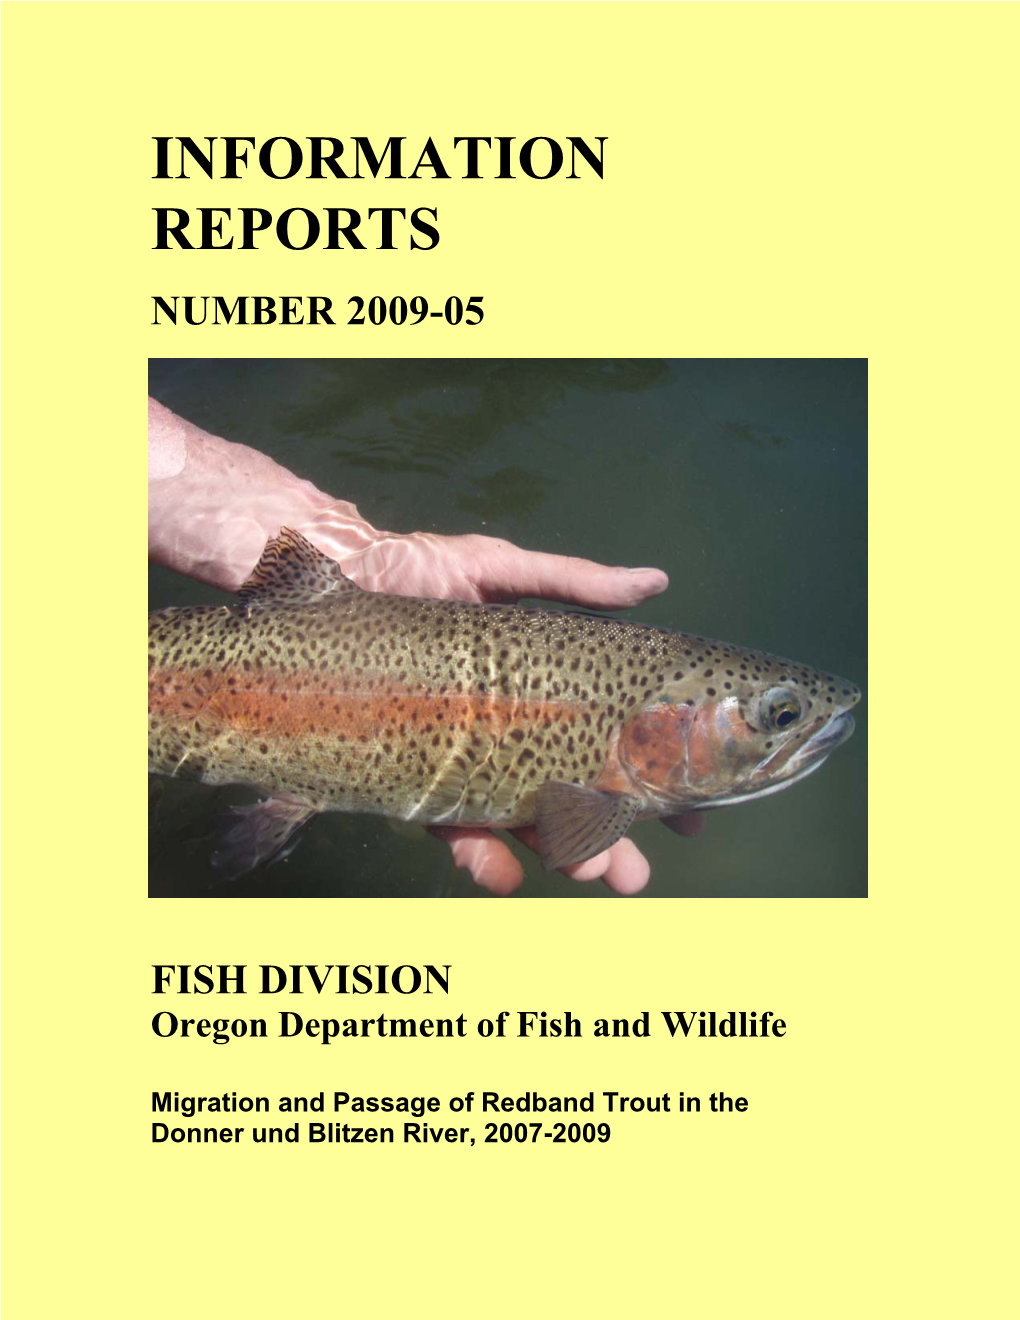 Migration and Passage of Redband Trout in the Donner Und Blitzen River, 2007-2009